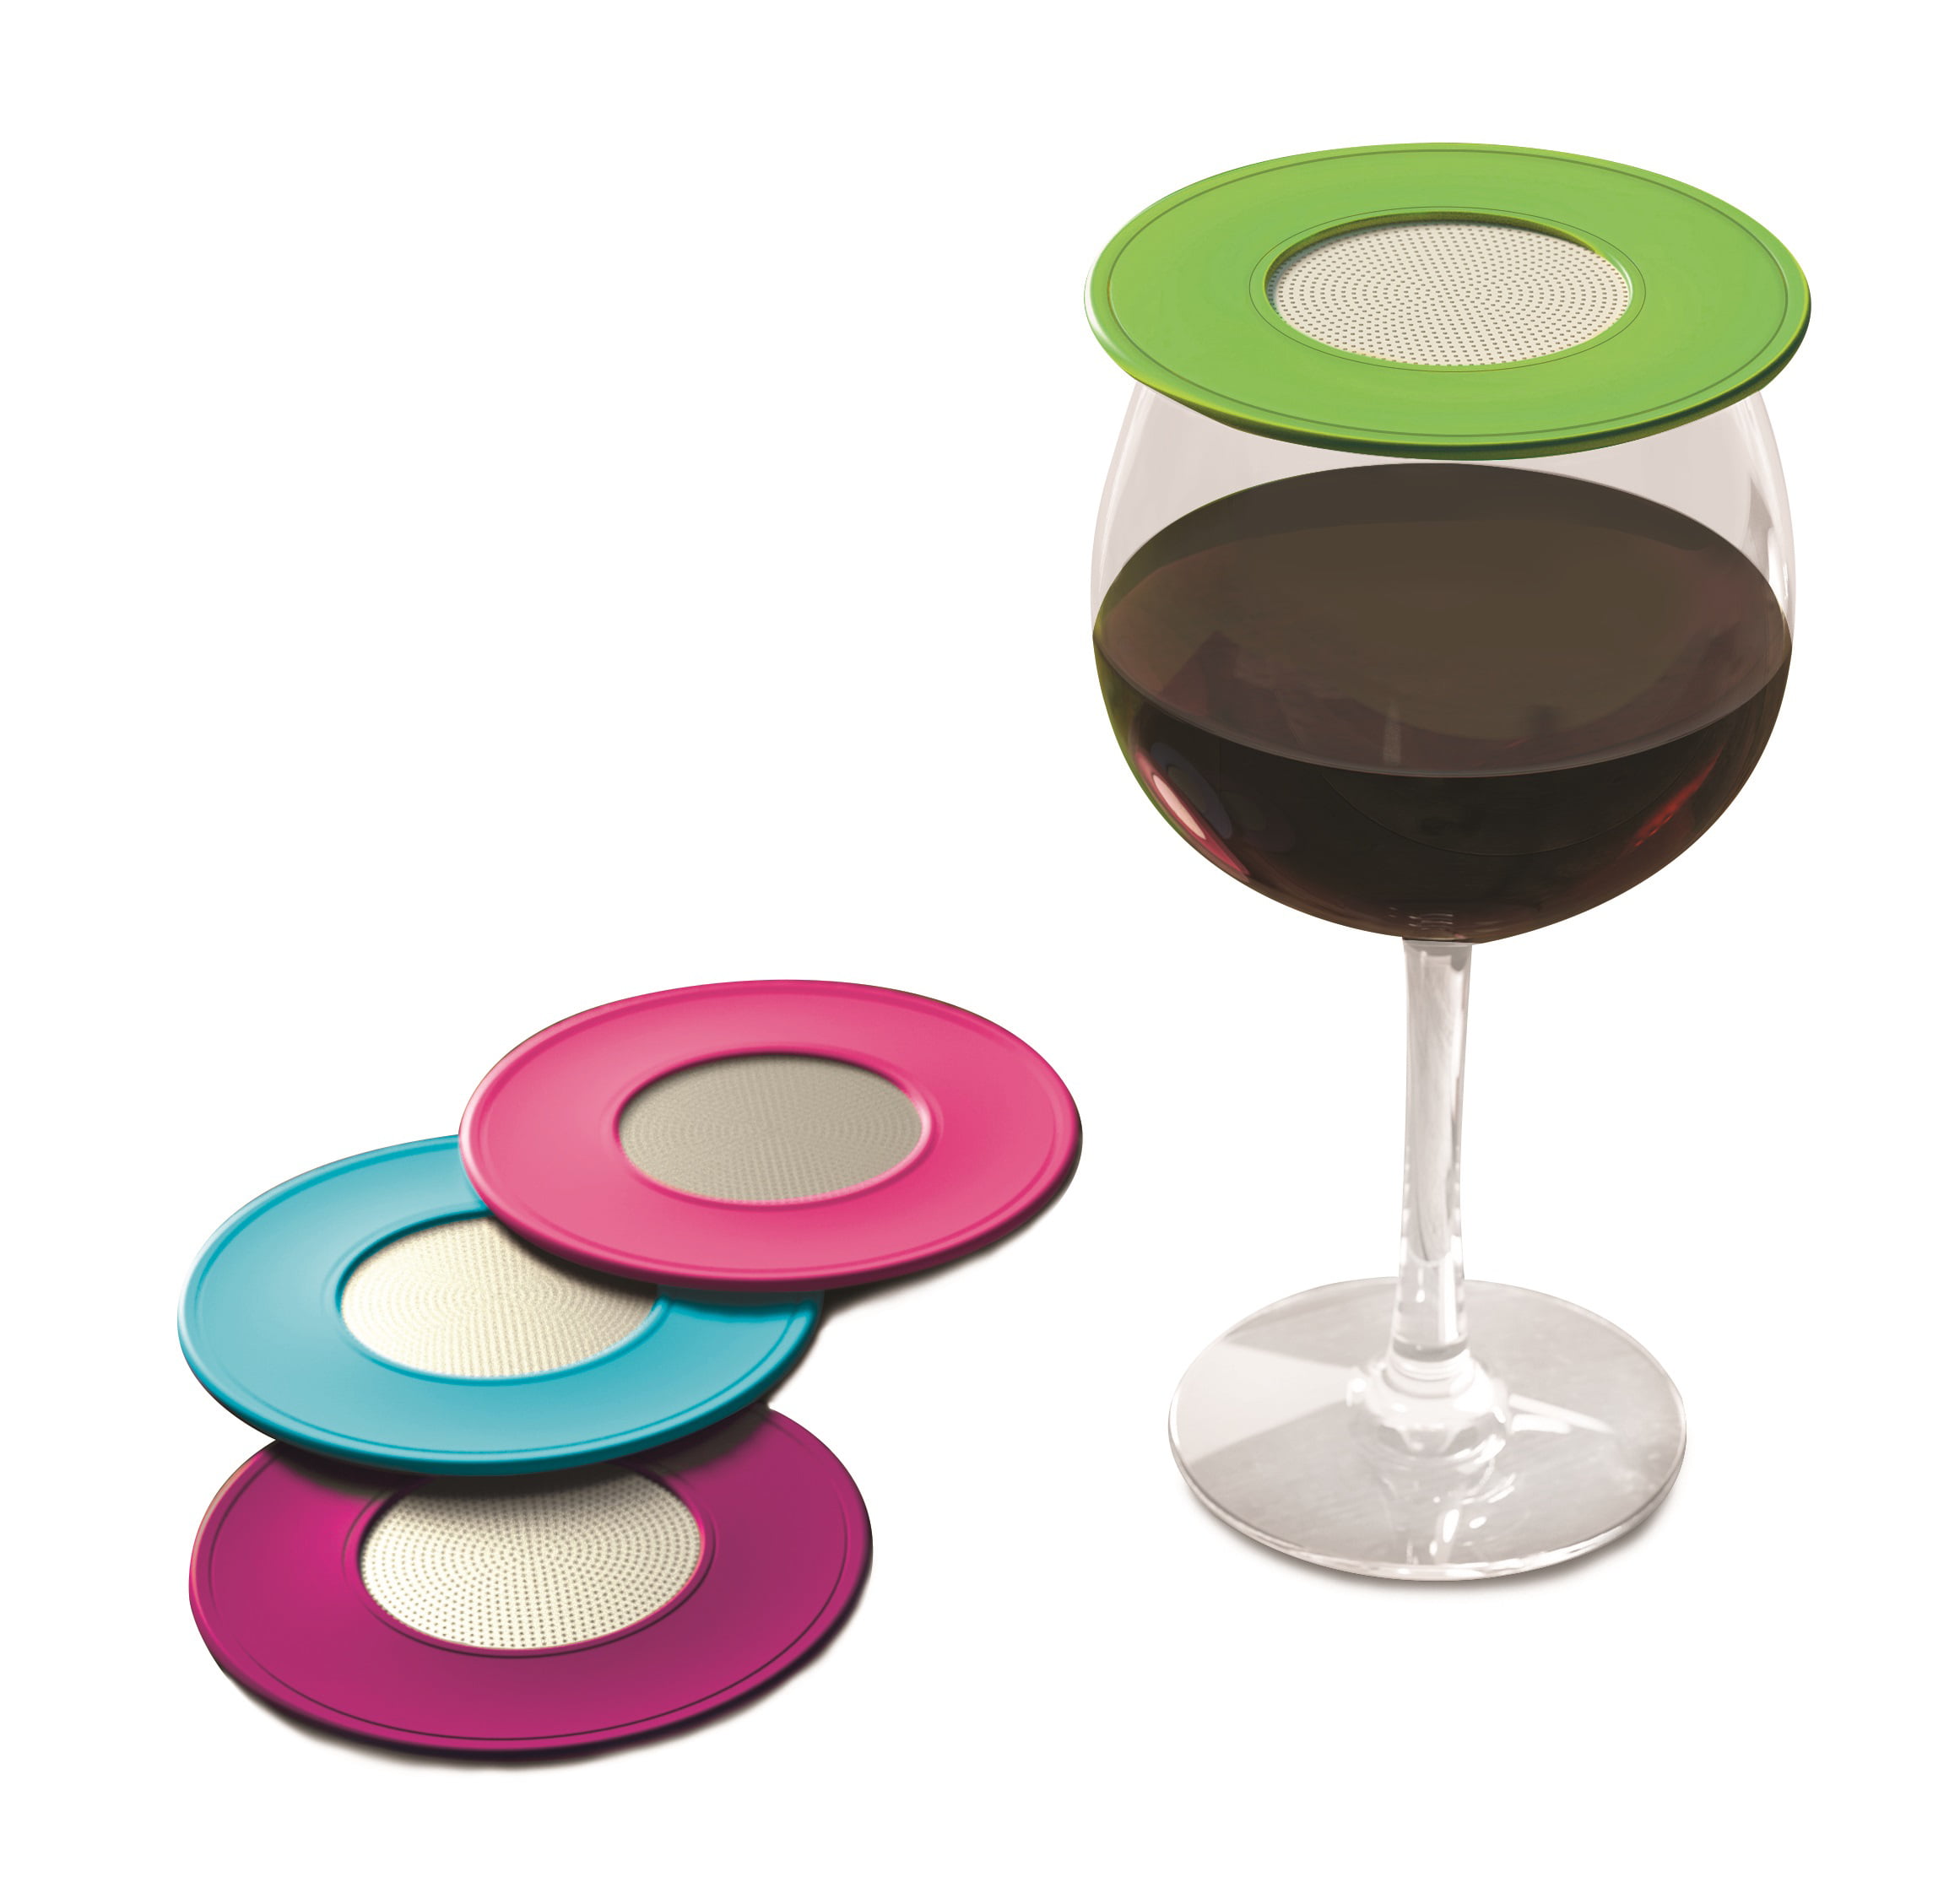 Drink Tops Tap and Seal Coffee and Tea Covers - Gently Suctions to Mugs to  Keep Drinks Warmer Longer and Reduce Splashing - BPA Free Silicone Coffee